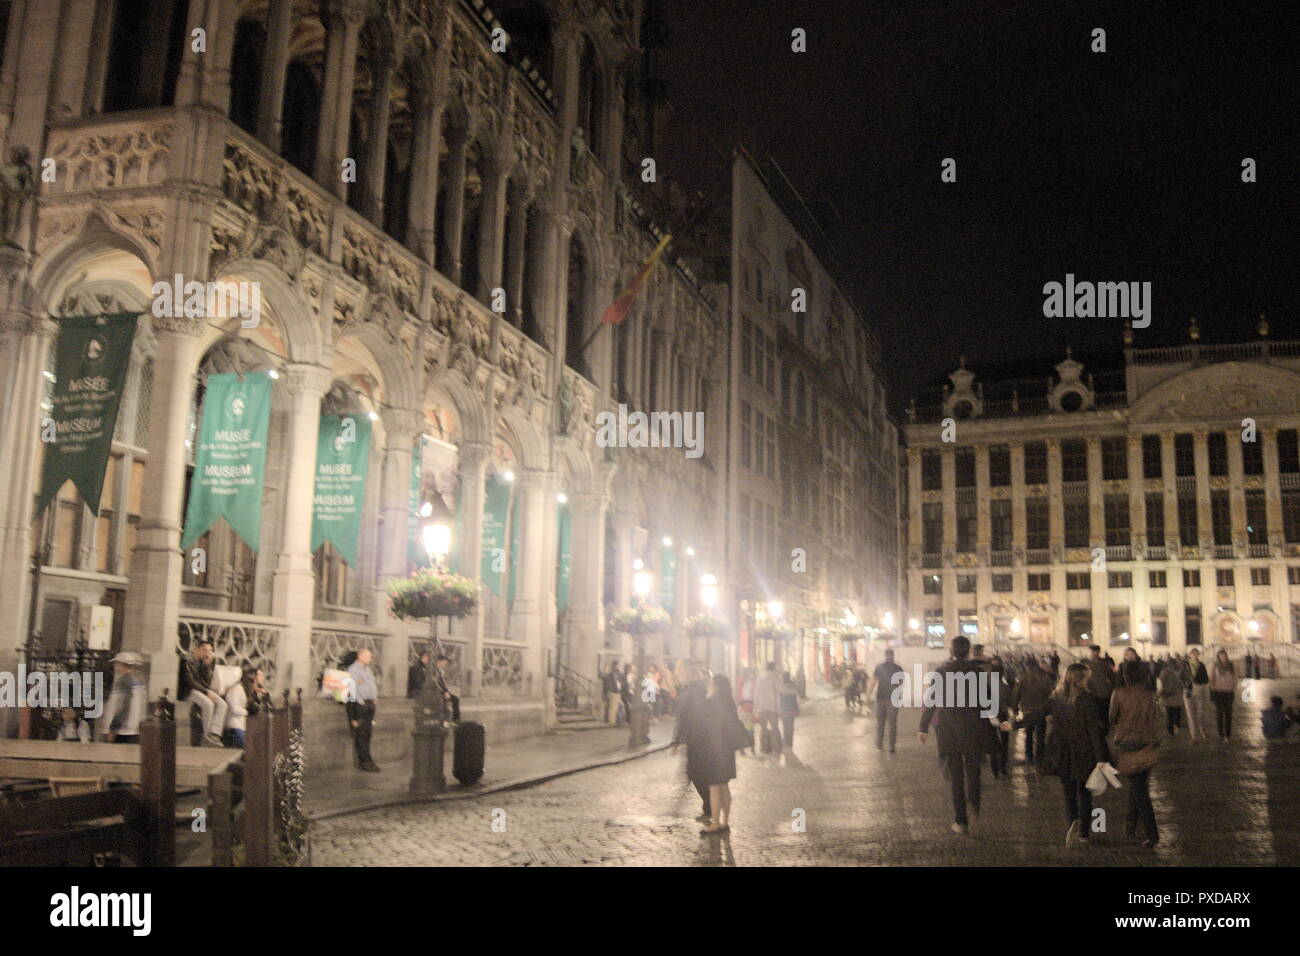 View of the Grande Place, in Brussels, Belgium at night. Elegant Gothic buildings line the historic square, as sightseers pass by. Stock Photo